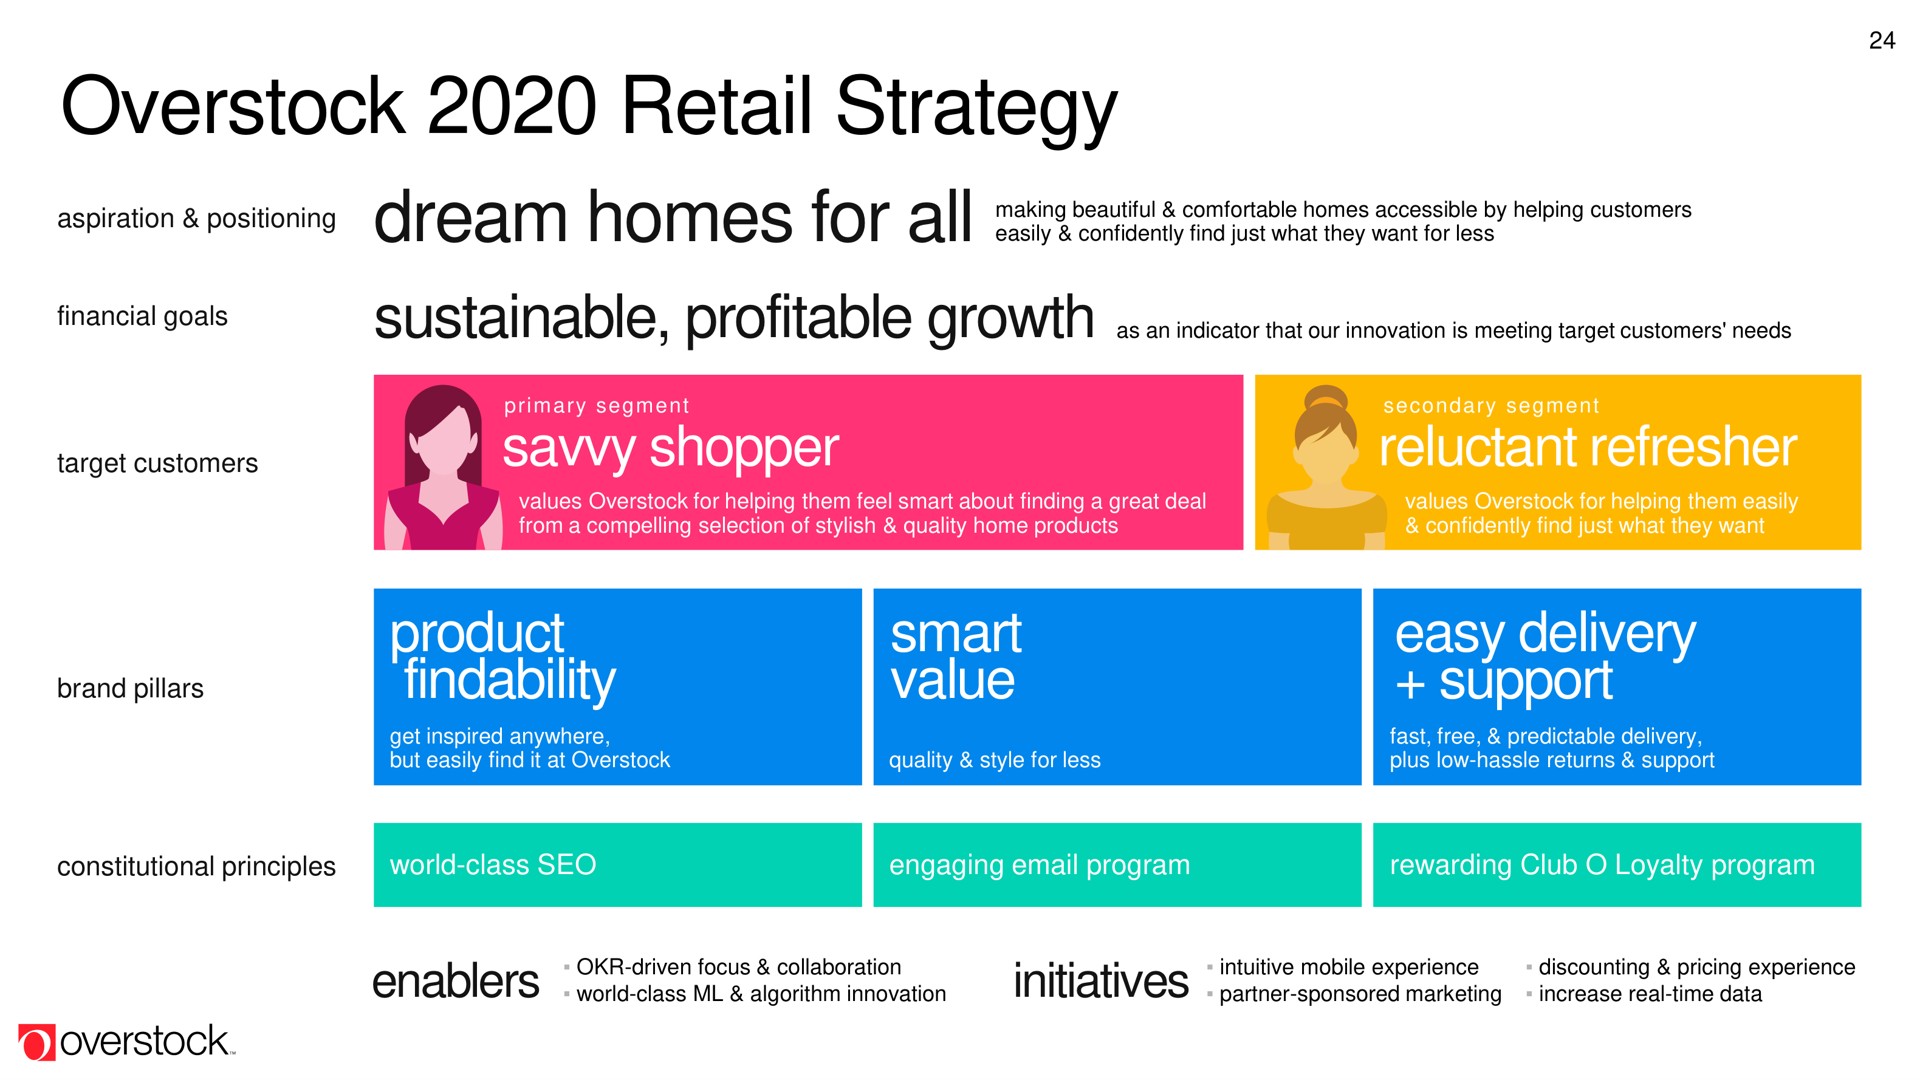 overstock retail strategy dream homes for all aspiration positioning nomes by hing customers cole smart cree inn | Overstock